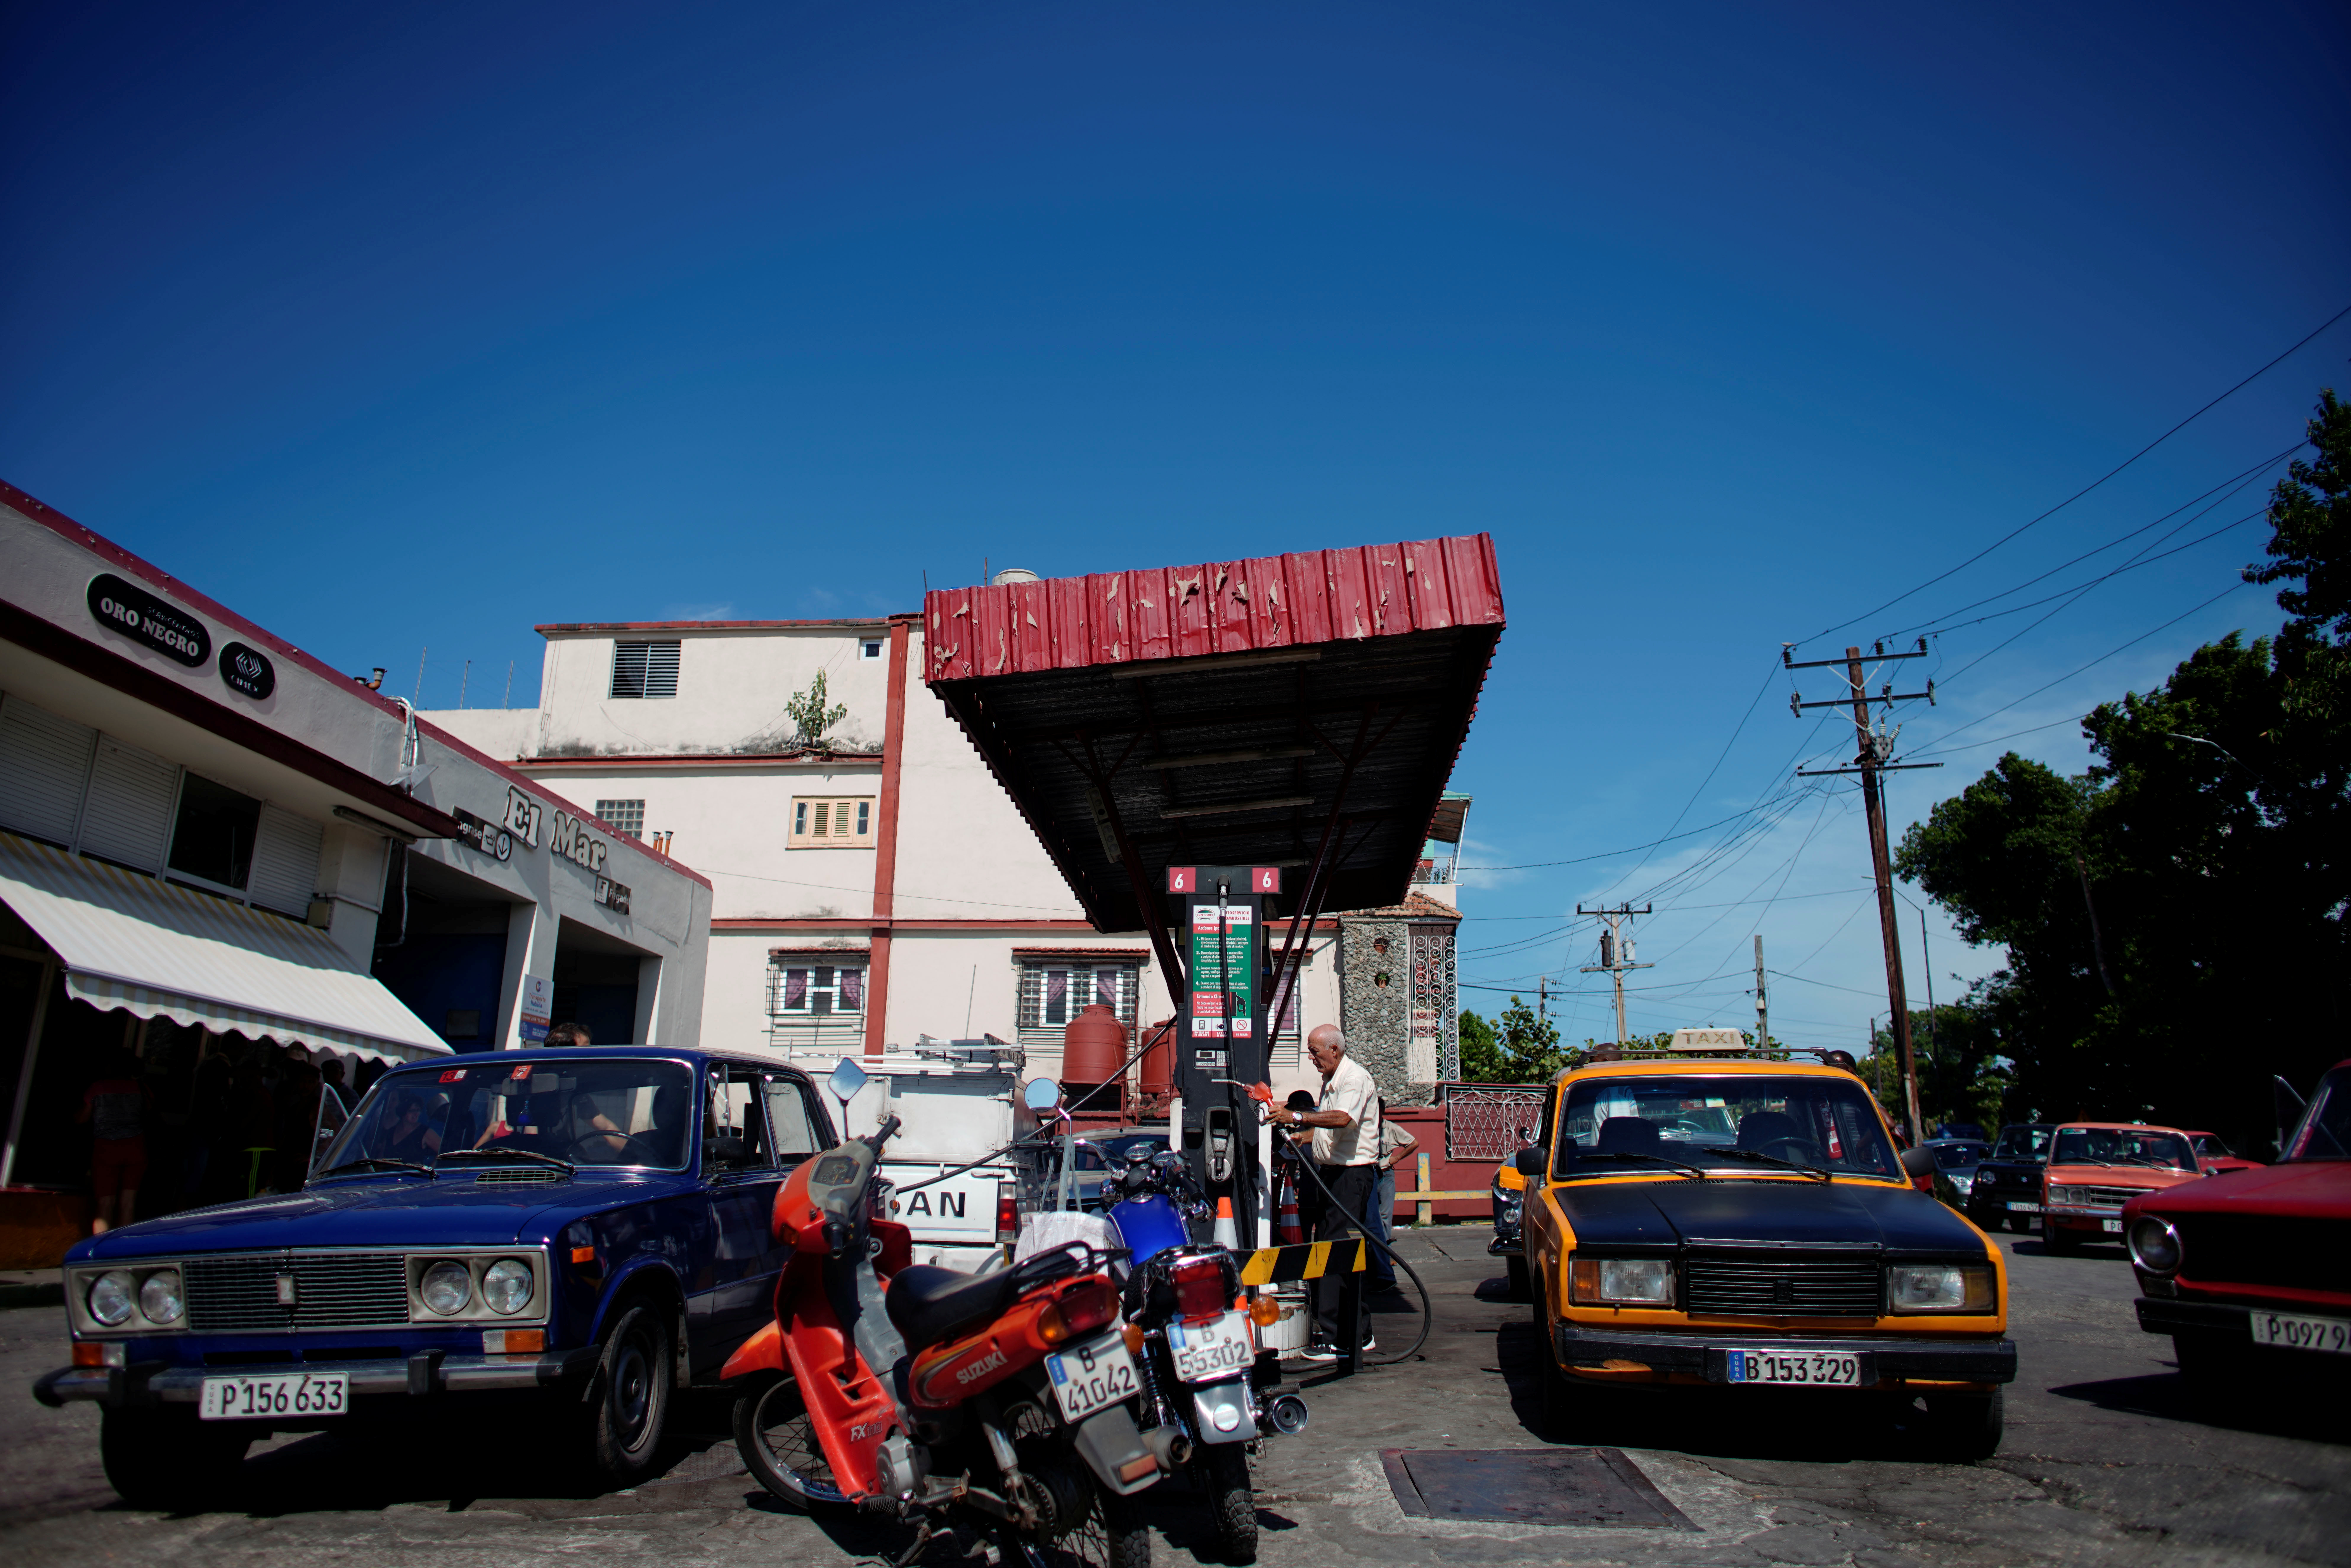 Cars line-up to buy fuel at a gas station in Havana